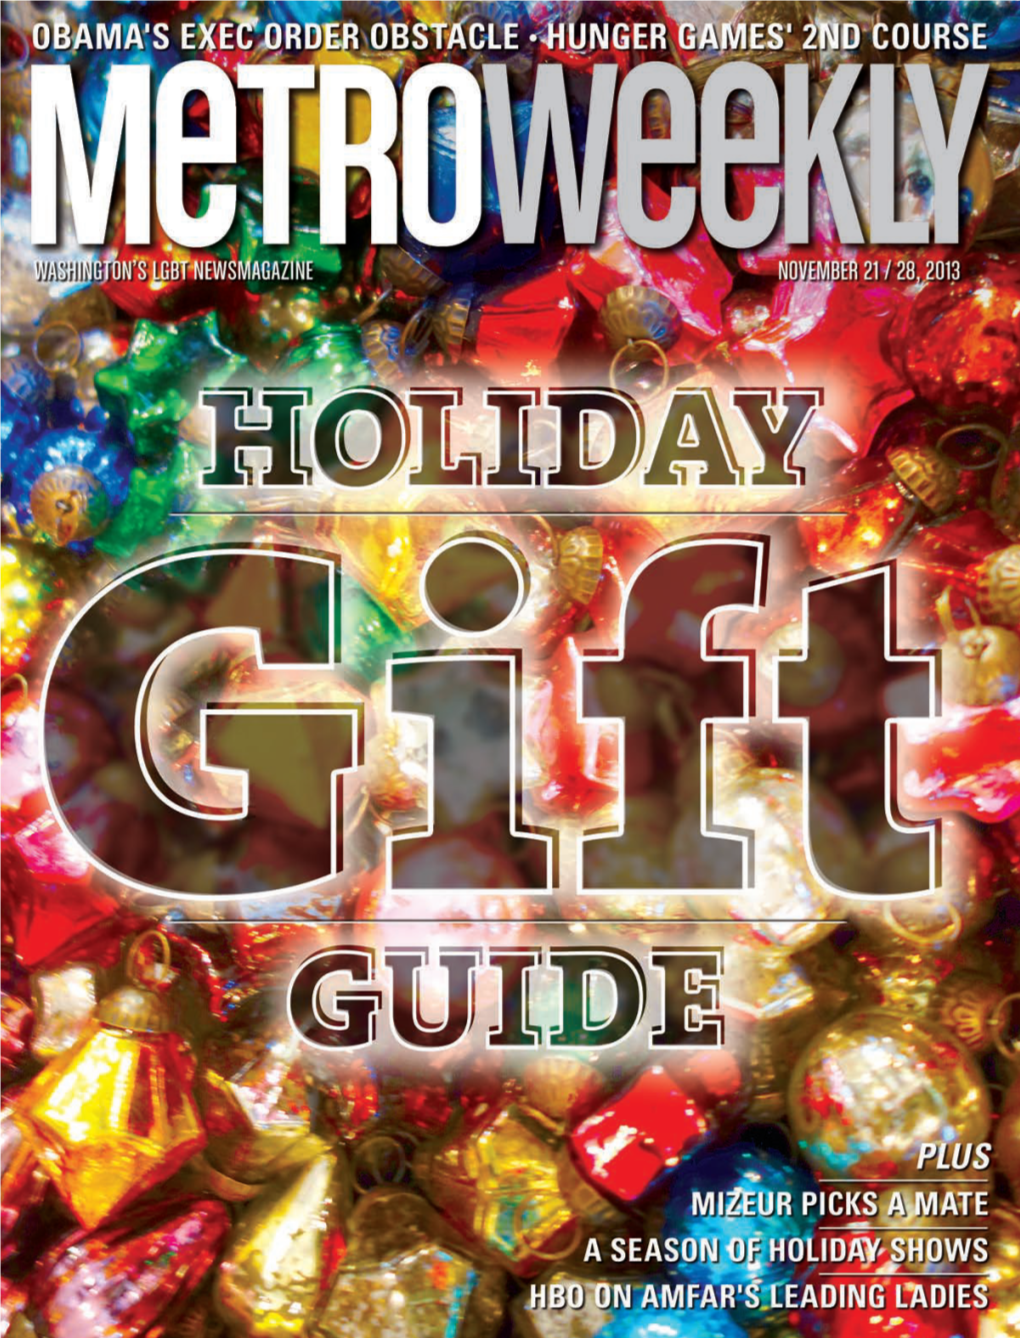 MW 11-21/28-13 Gift Guide Issue.Indd